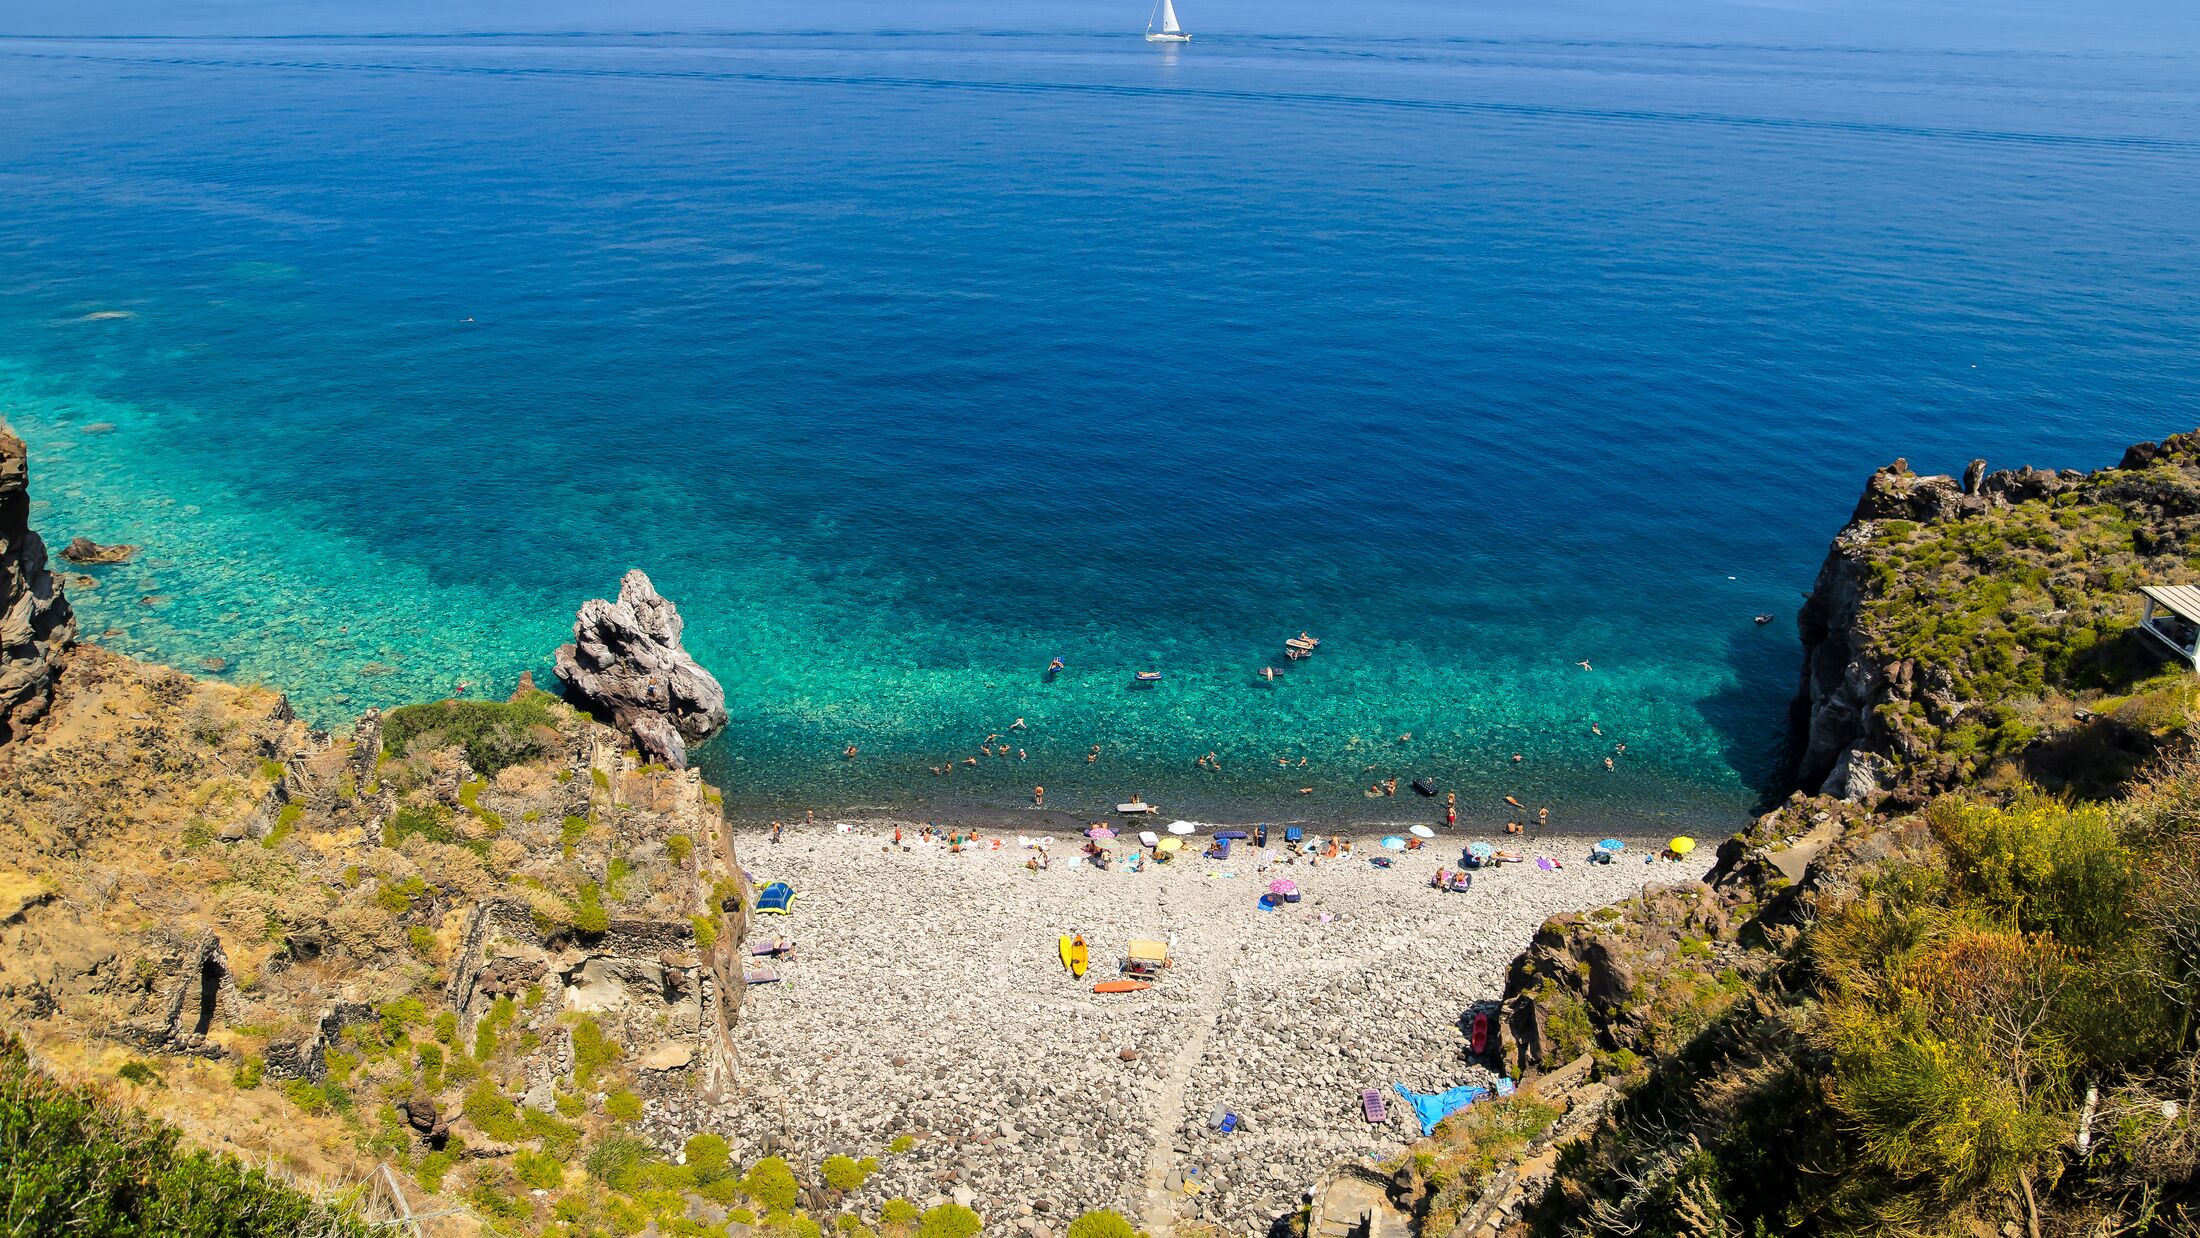 Aerial view of the crystal clear sea water at Spiaggia dello Scario beach in Malfa, Salina, Aeolian Islands. People enjoy the sun and sand on a clear summer day. Beautiful holiday destination.